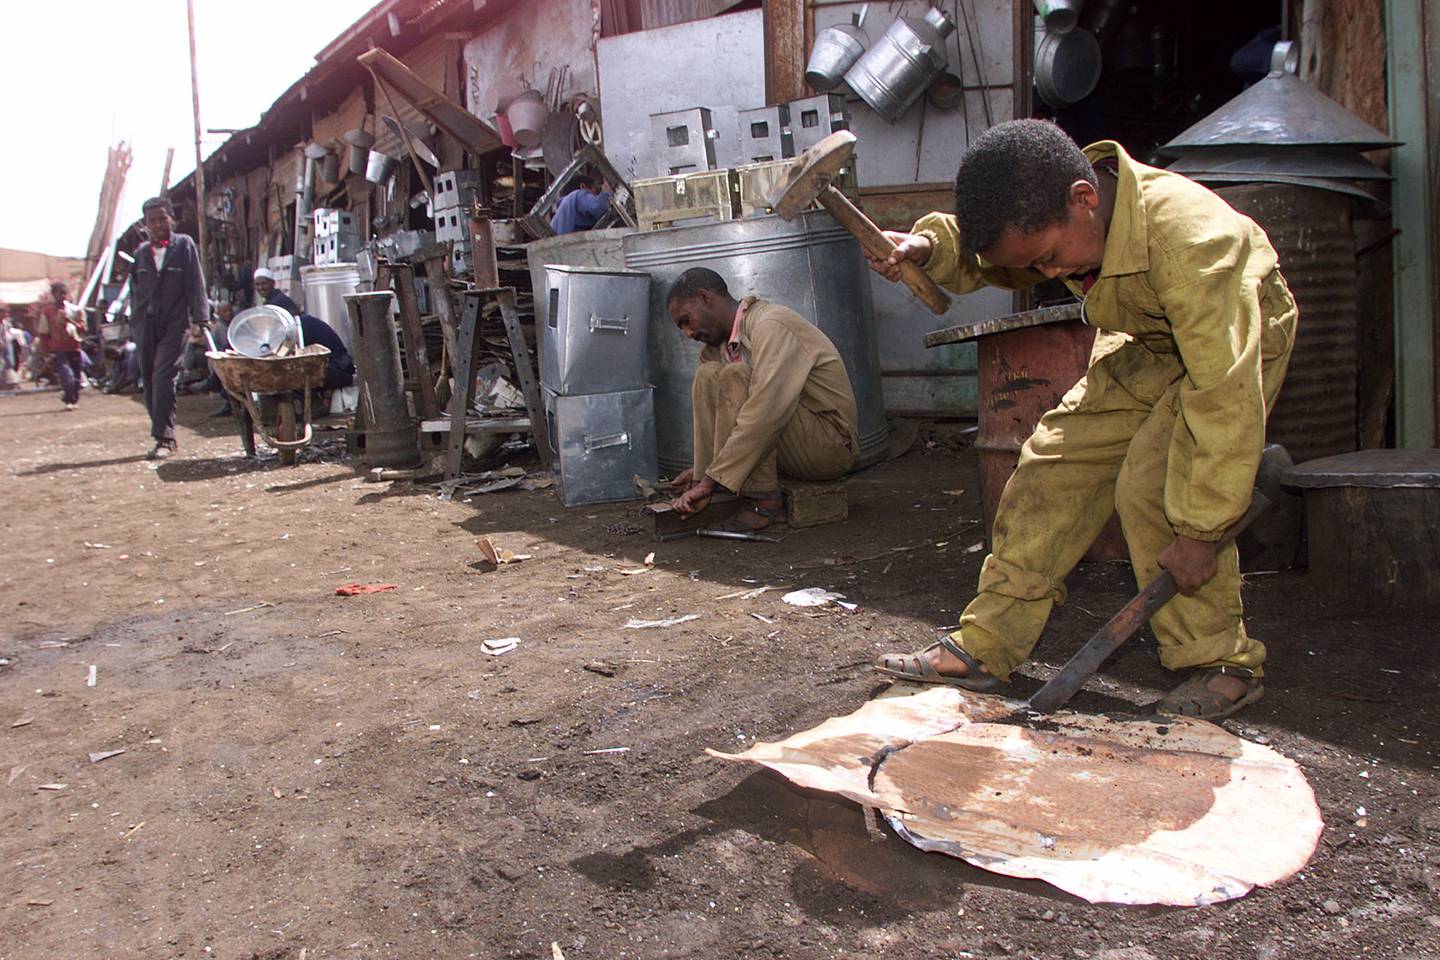 A child works at cutting a piece of metal at a metal recycling shop in Asmara, Eritrea Saturday, June 3, 2000. Workers in Asmara recycle virtually everything, but the two-year war with Ethiopia is threatening to erode Eritrea's fabled self reliance. (AP Photo/Jean-Marc Bouju)